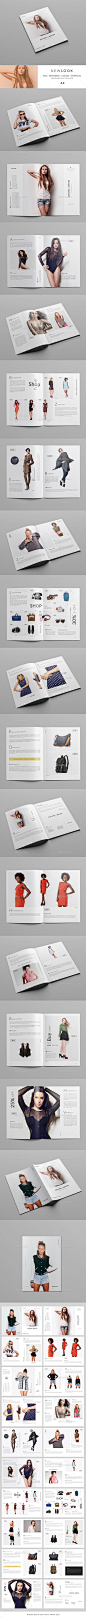 New Look / Fashion Catalogue & Magazine  #booklet #brochure #catalog • Available here → http://graphicriver.net/item/new-look-fashion-catalogue-magazine/15458413?s_rank=150&ref=pxcr: 